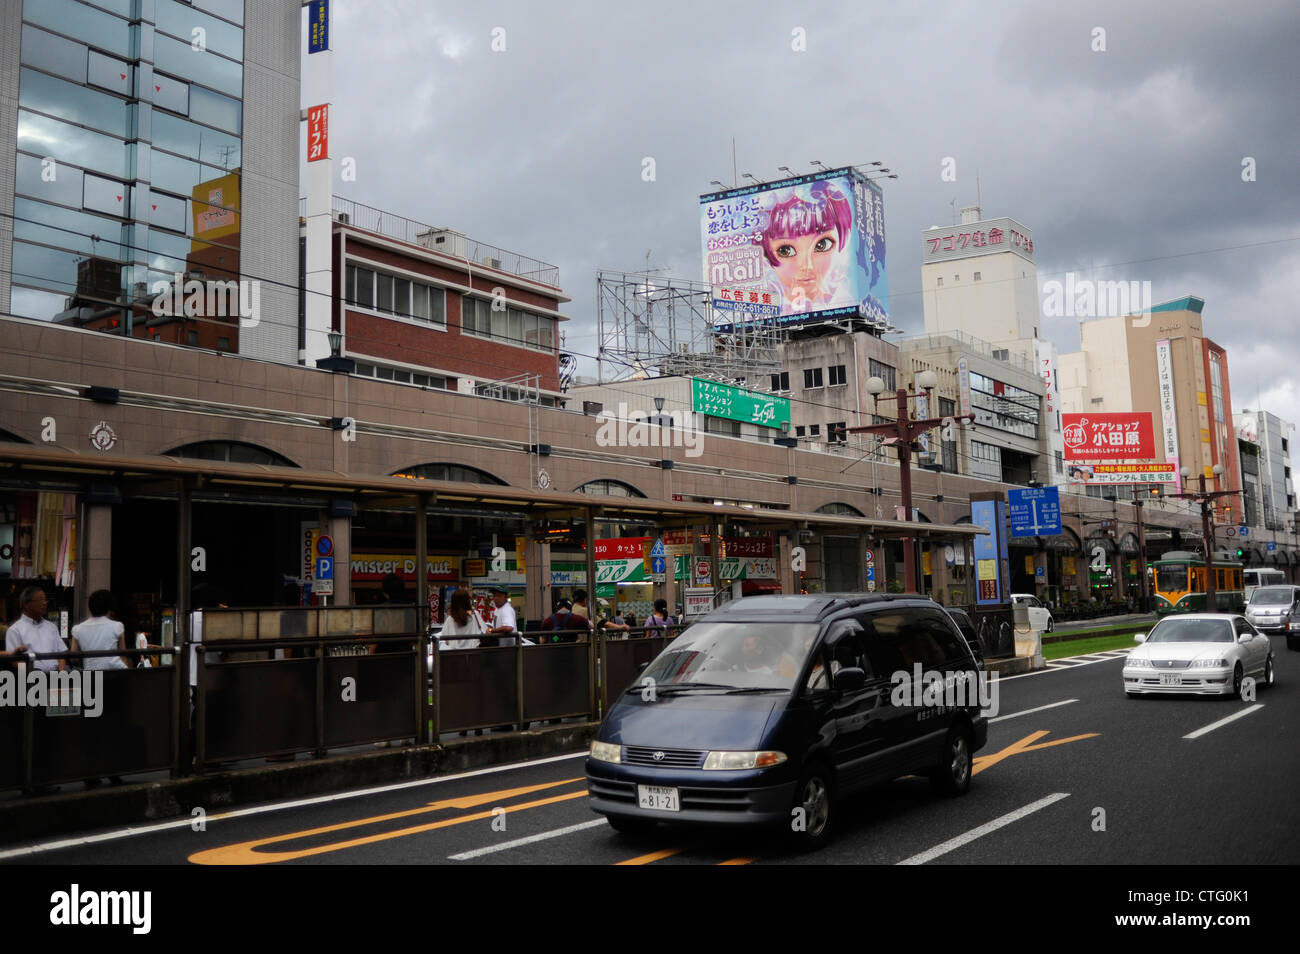 General view of a street in Kagoshima in Japan Stock Photo